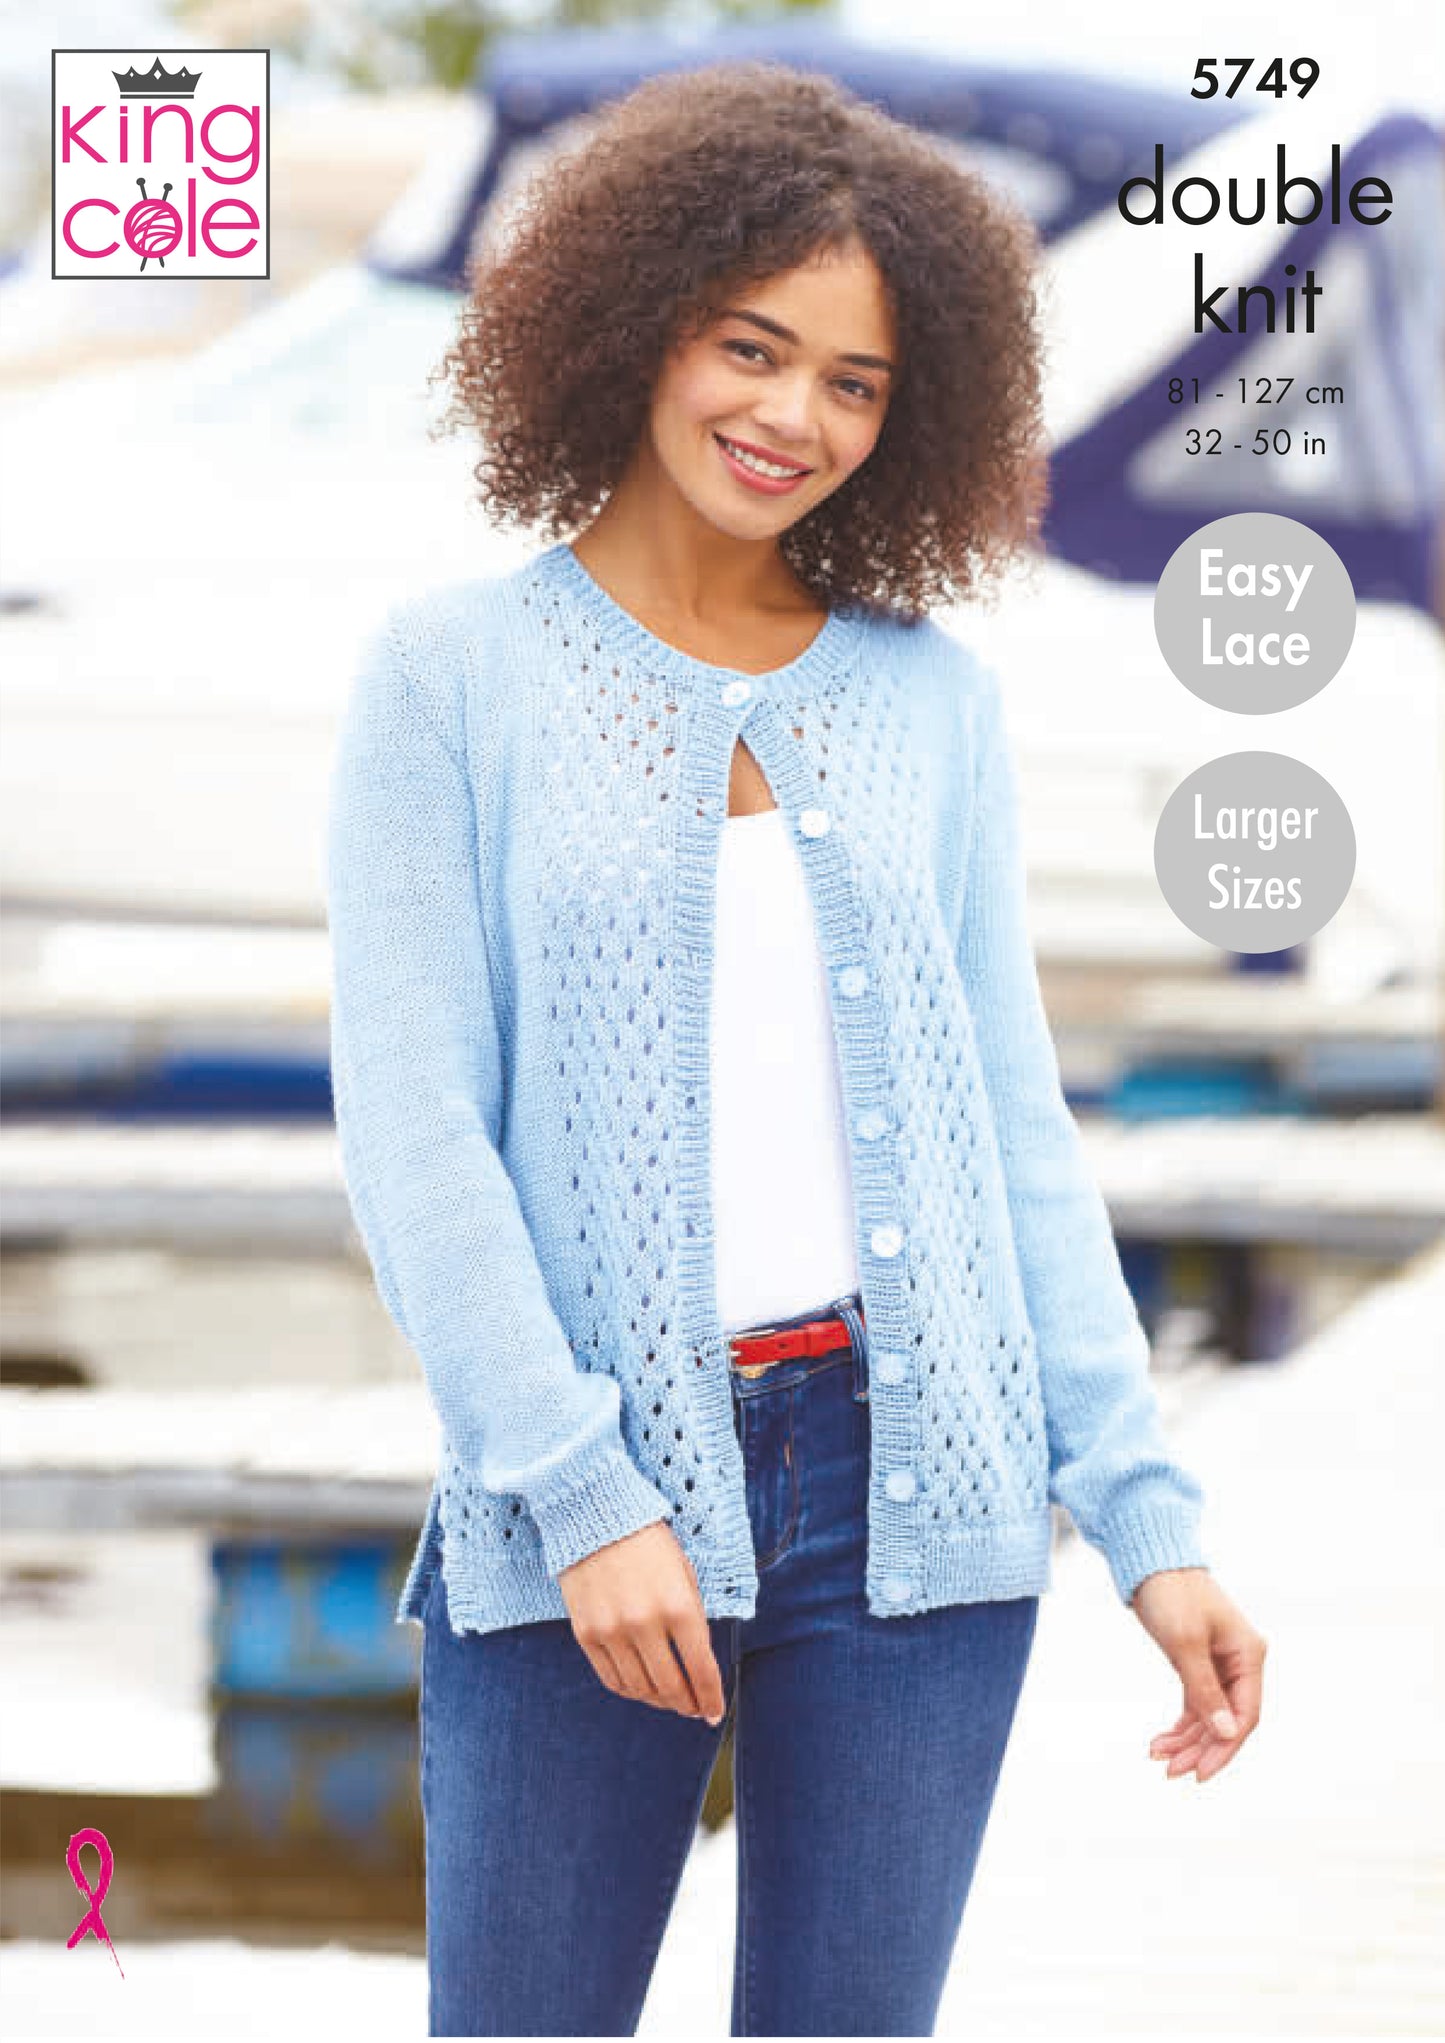 King Cole Cottonsmooth DK Pattern - 5749 Cardigan and Sweater